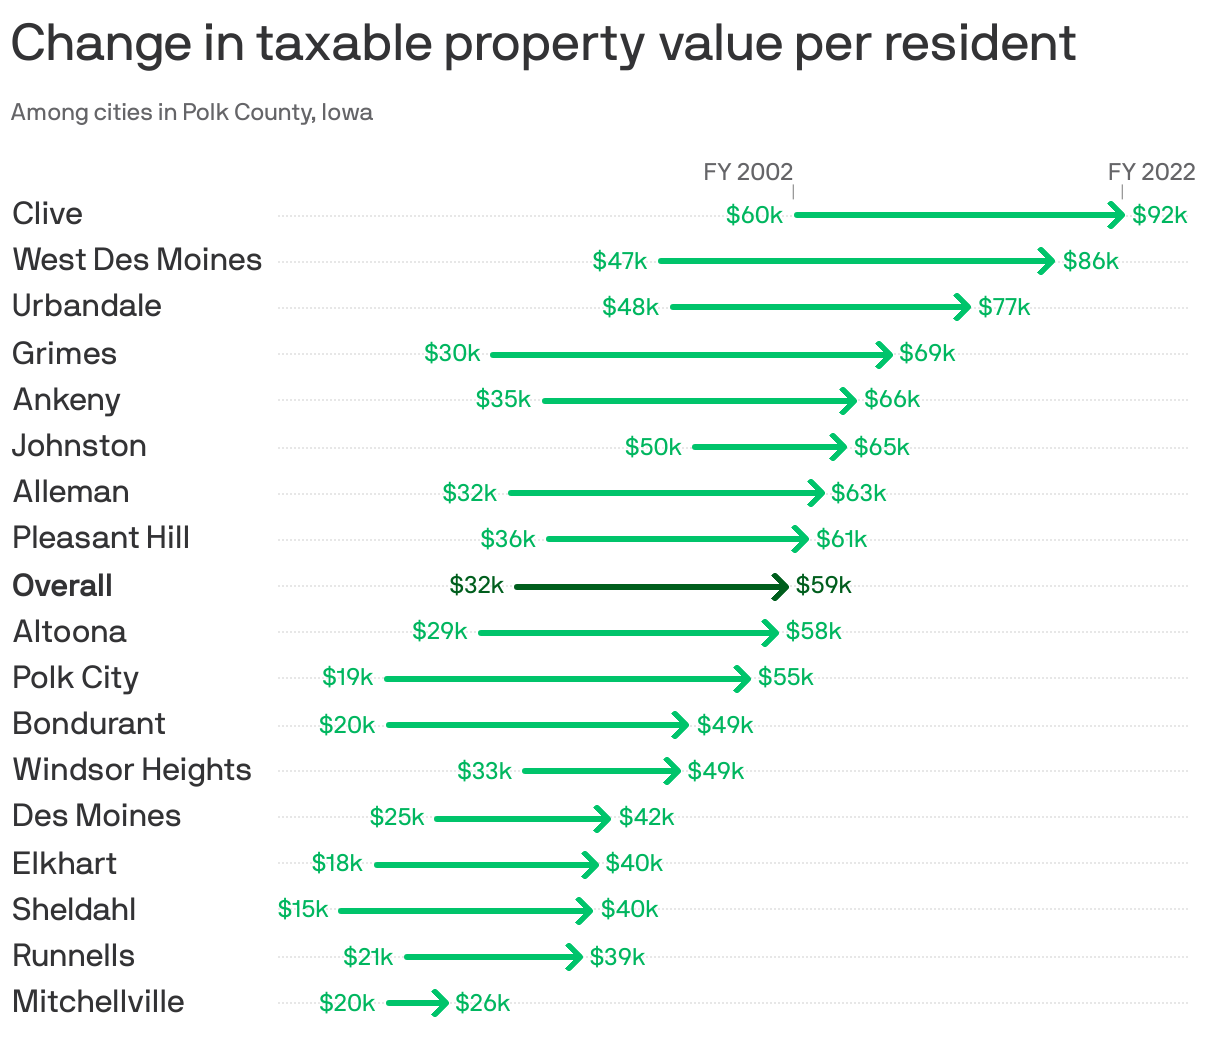 Change in taxable property value per resident